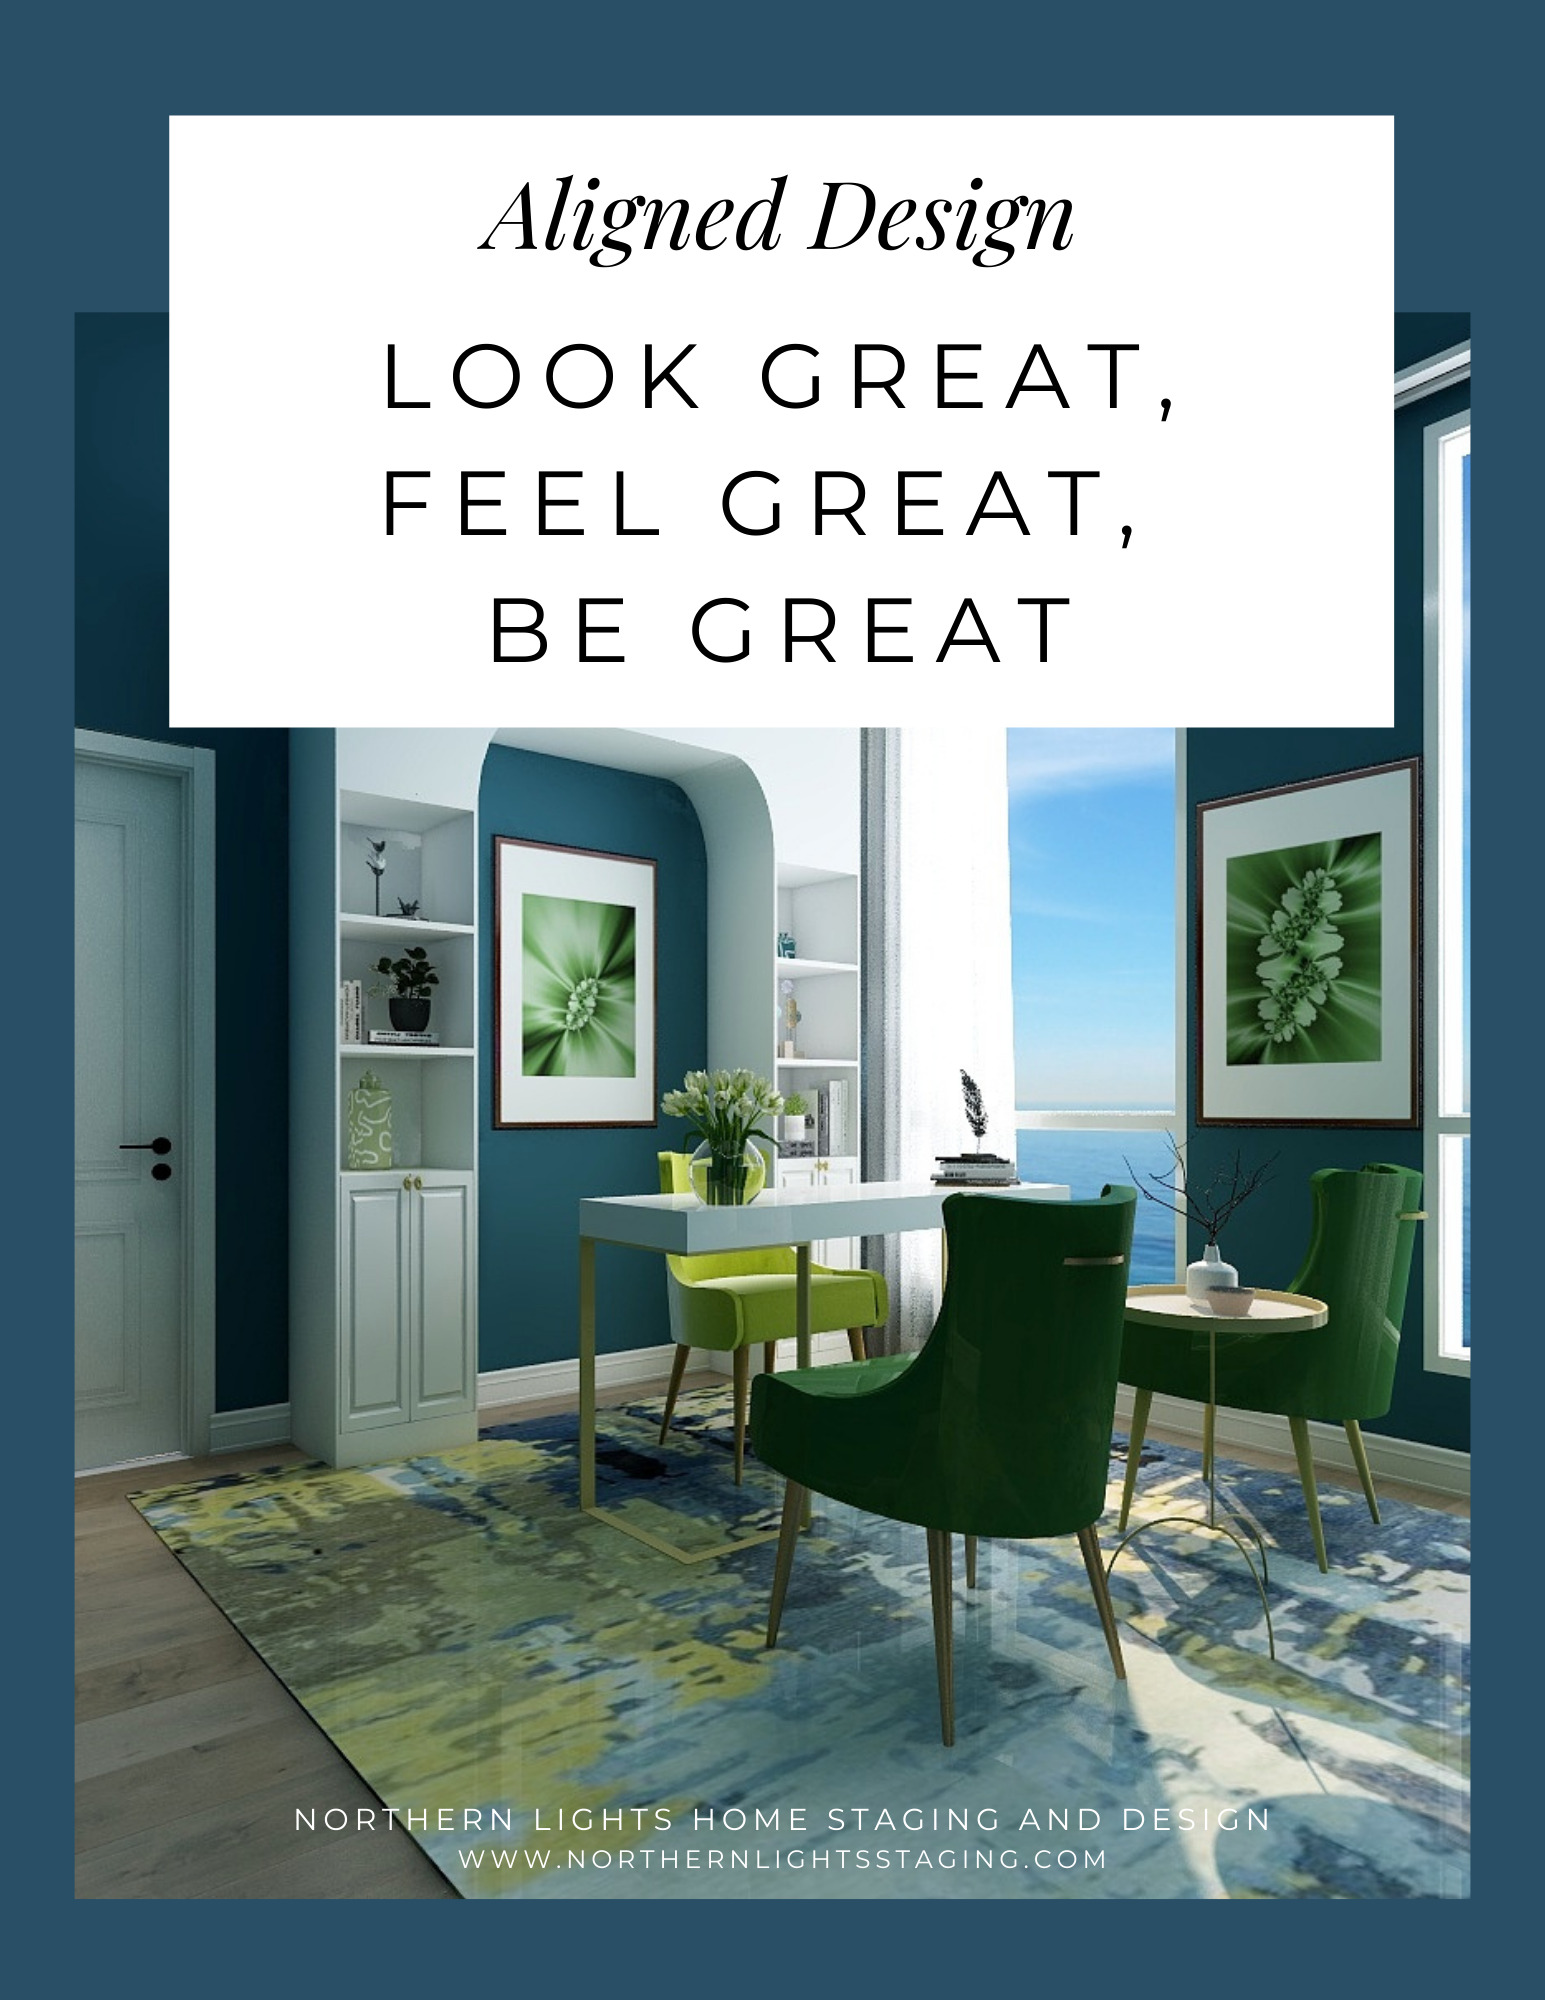 Aligned Design- Make Look Great, Feel Great, Be Great